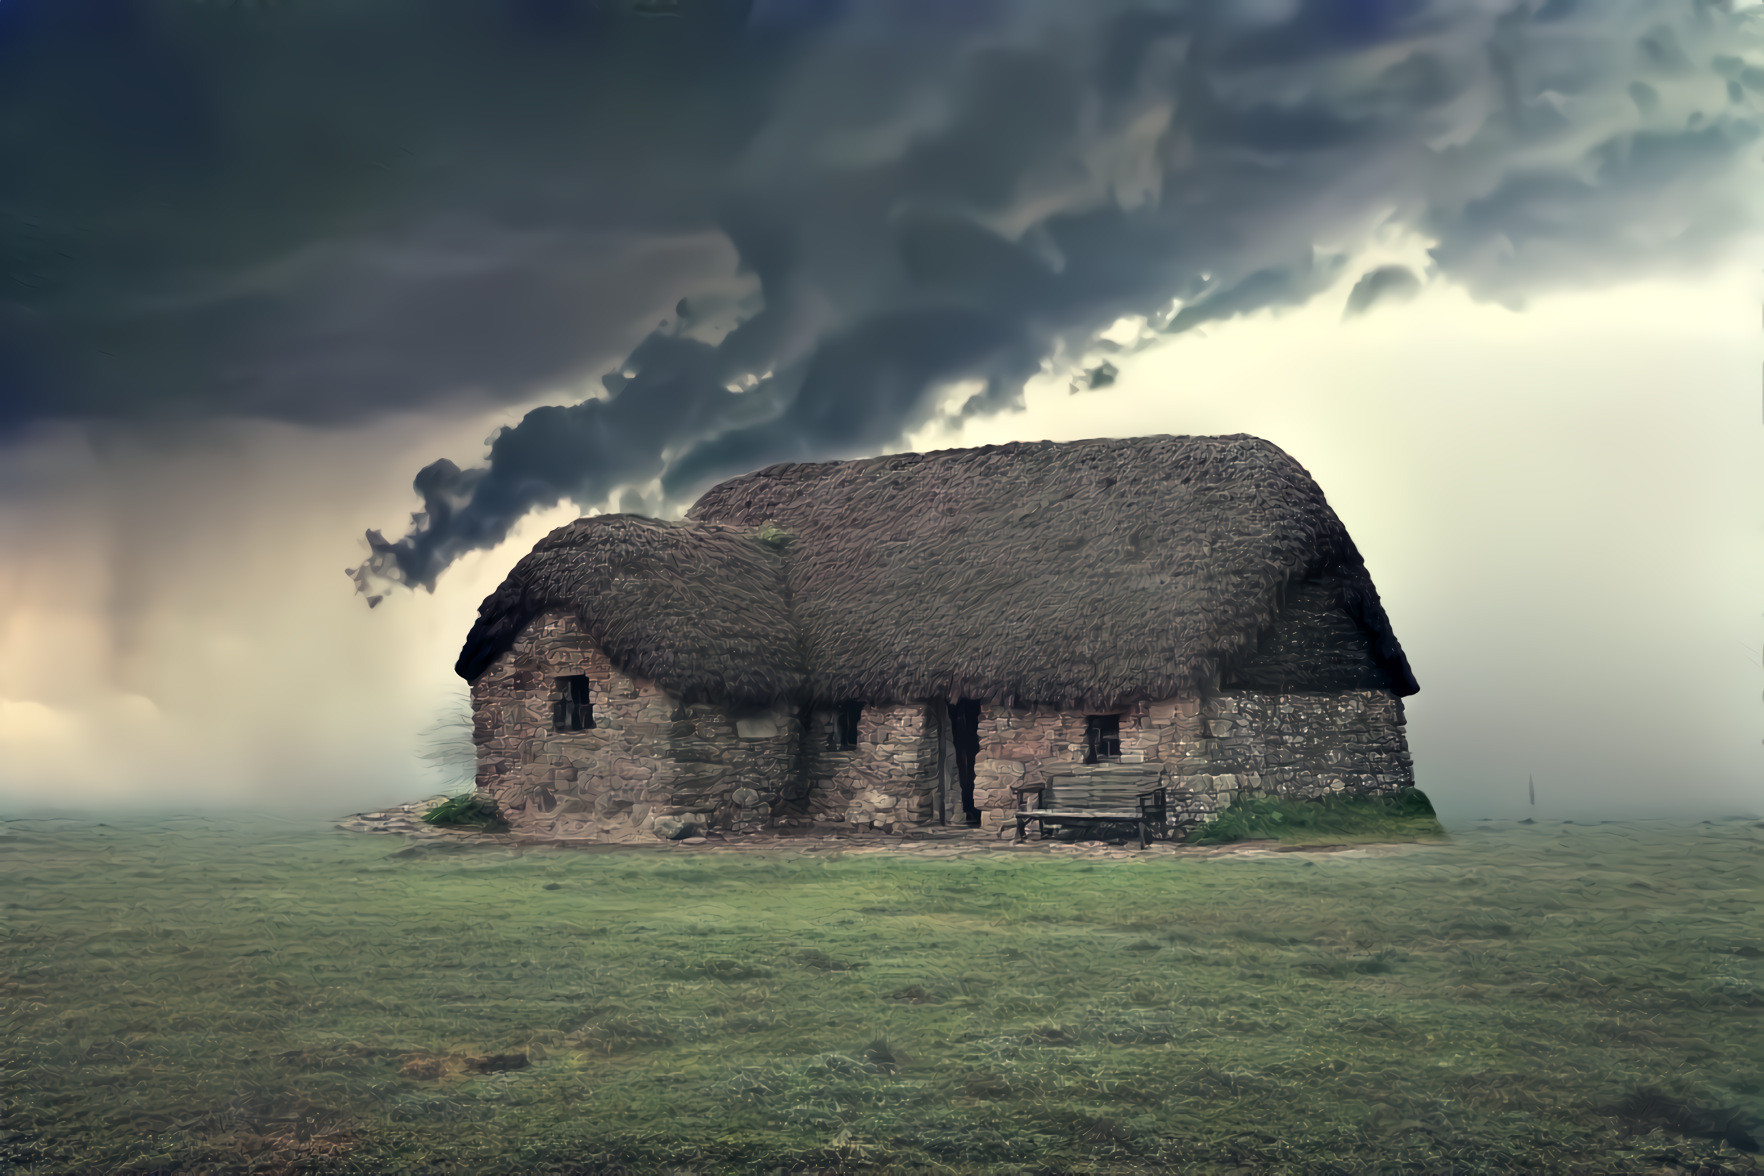 Stone House, Thatched Roof, Storm Clouds